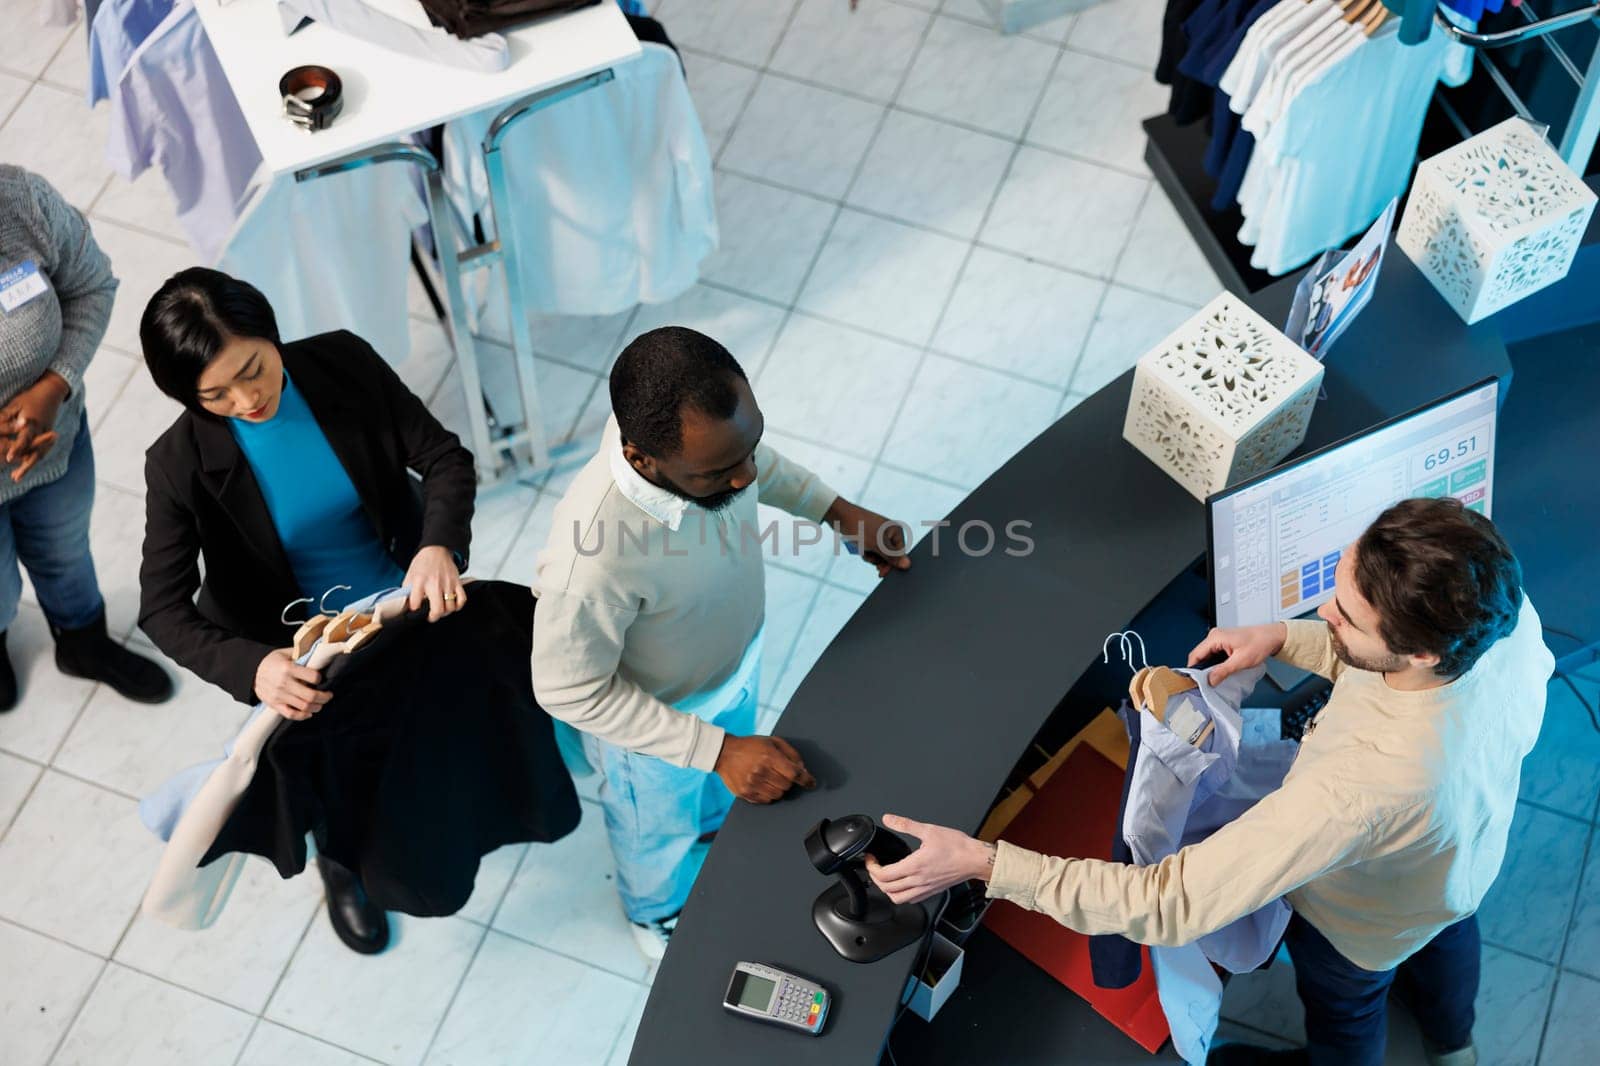 Cashier at clothing store checkout desk scanning and processing purchase for customer top view. Diverse people standing in line at counter desk while boutique employee using scanner